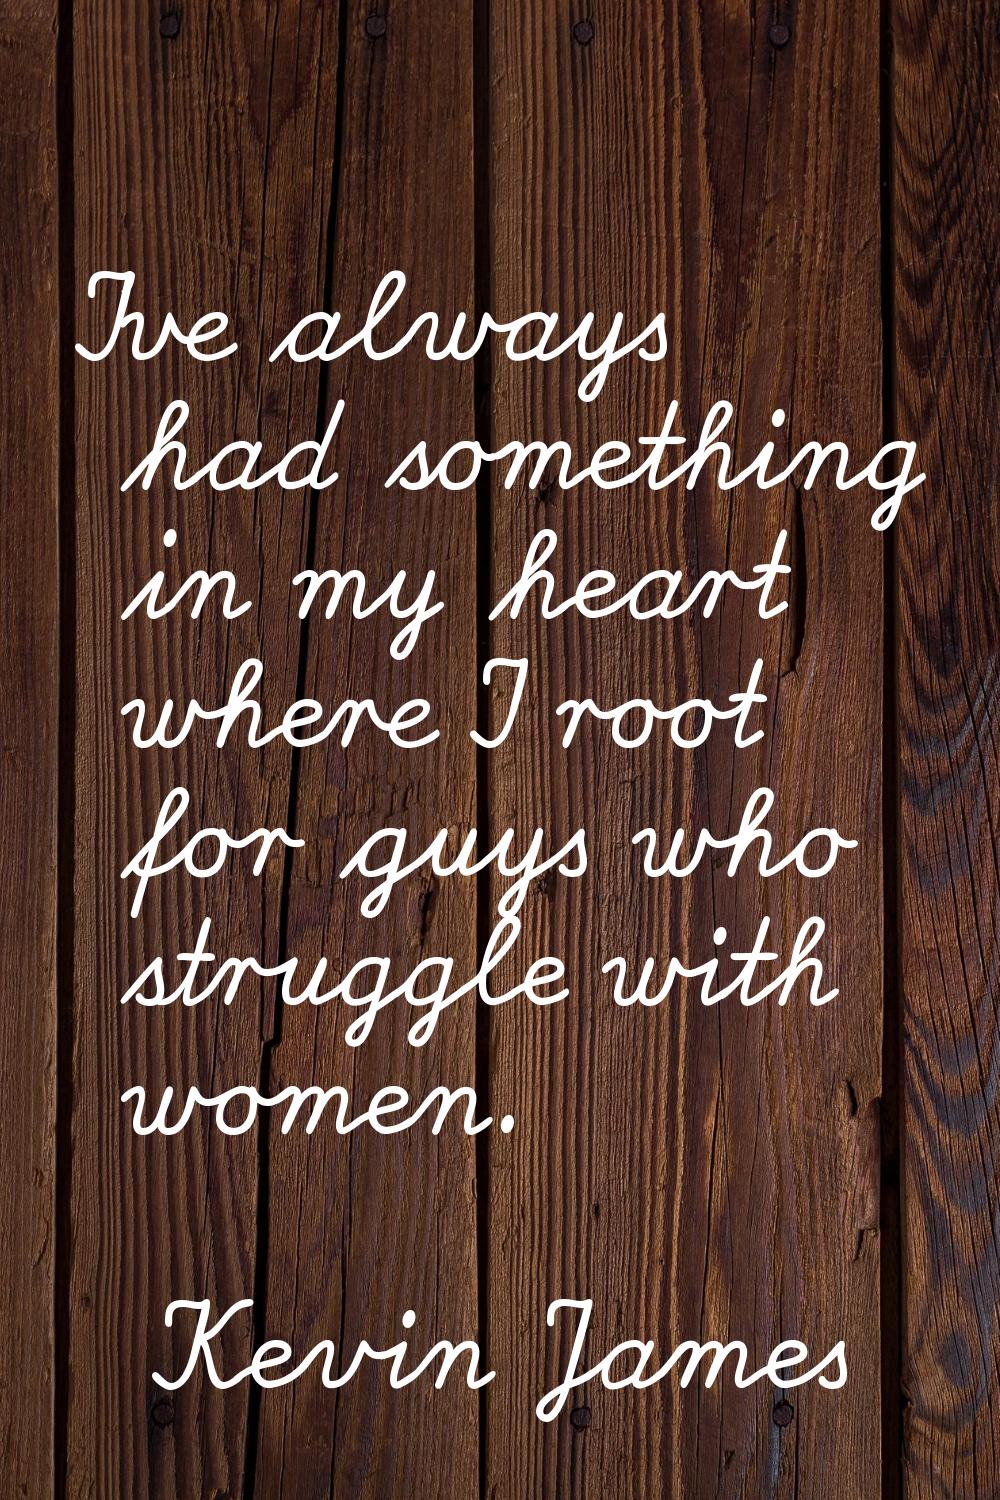 I've always had something in my heart where I root for guys who struggle with women.